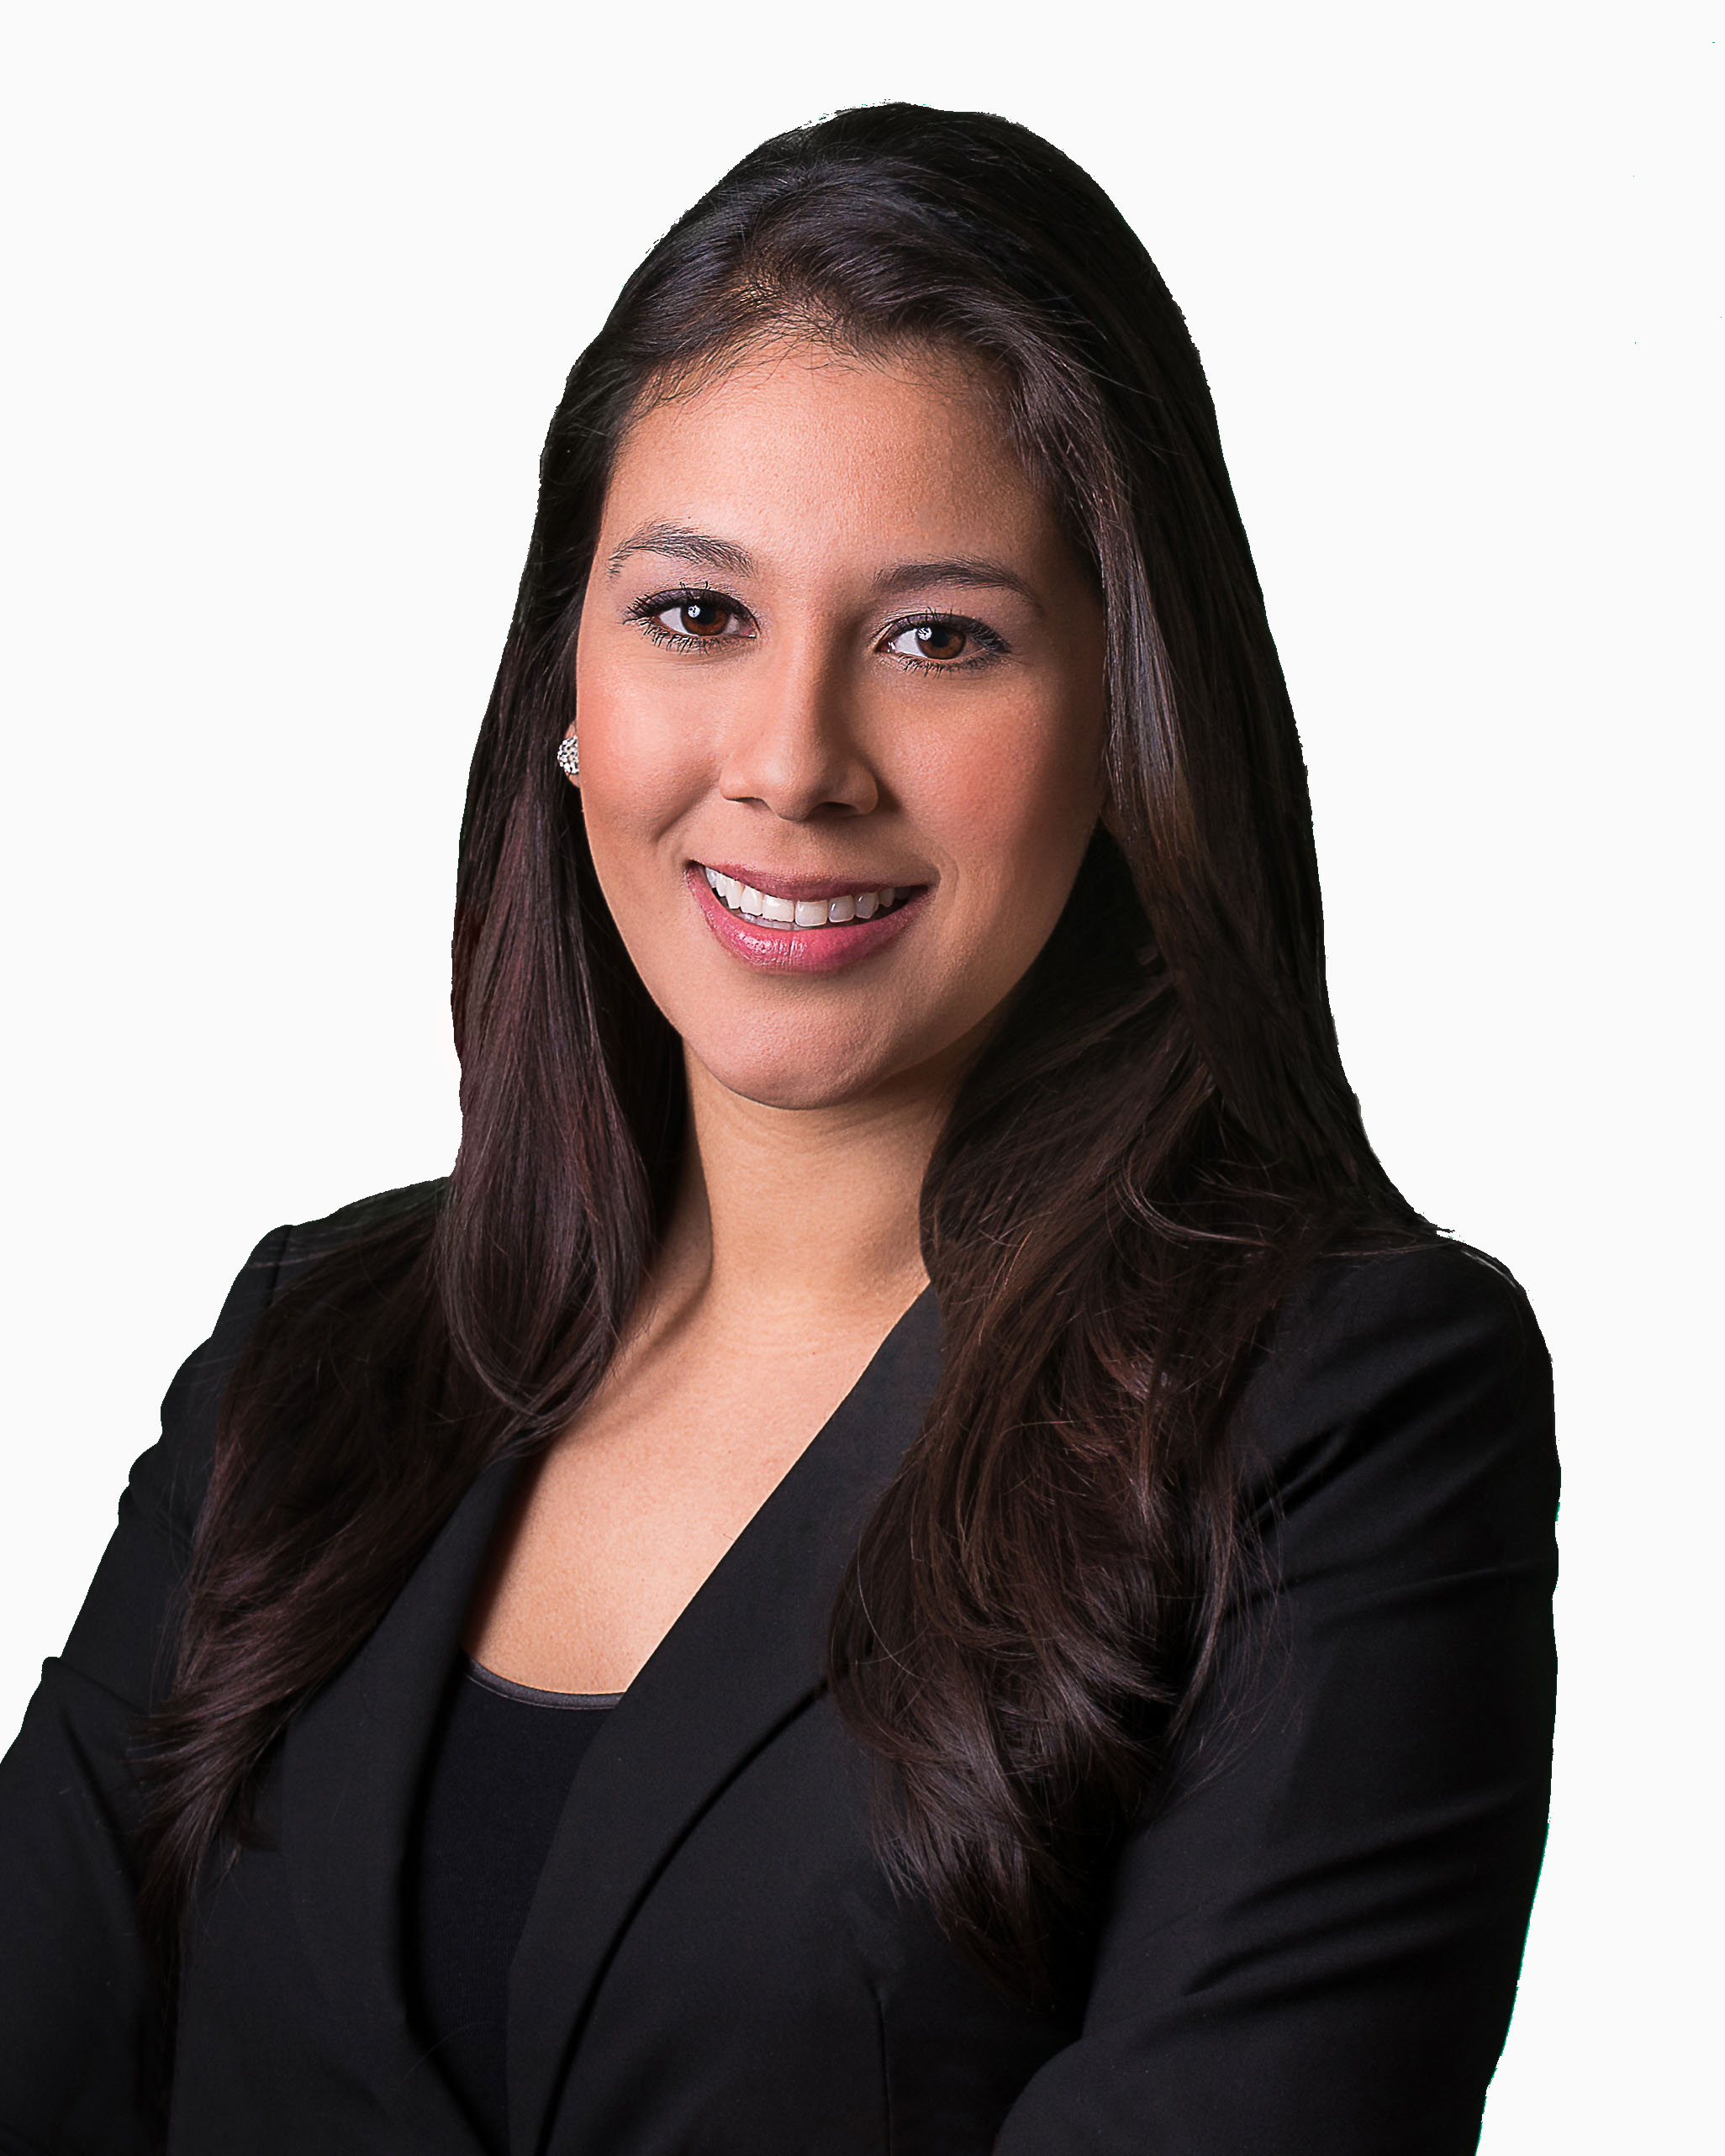 Monica L. Perez-Named Texas Super Lawyer Rising Star 2018 by Thomson Reuters, as published in Texas Monthly Magazine